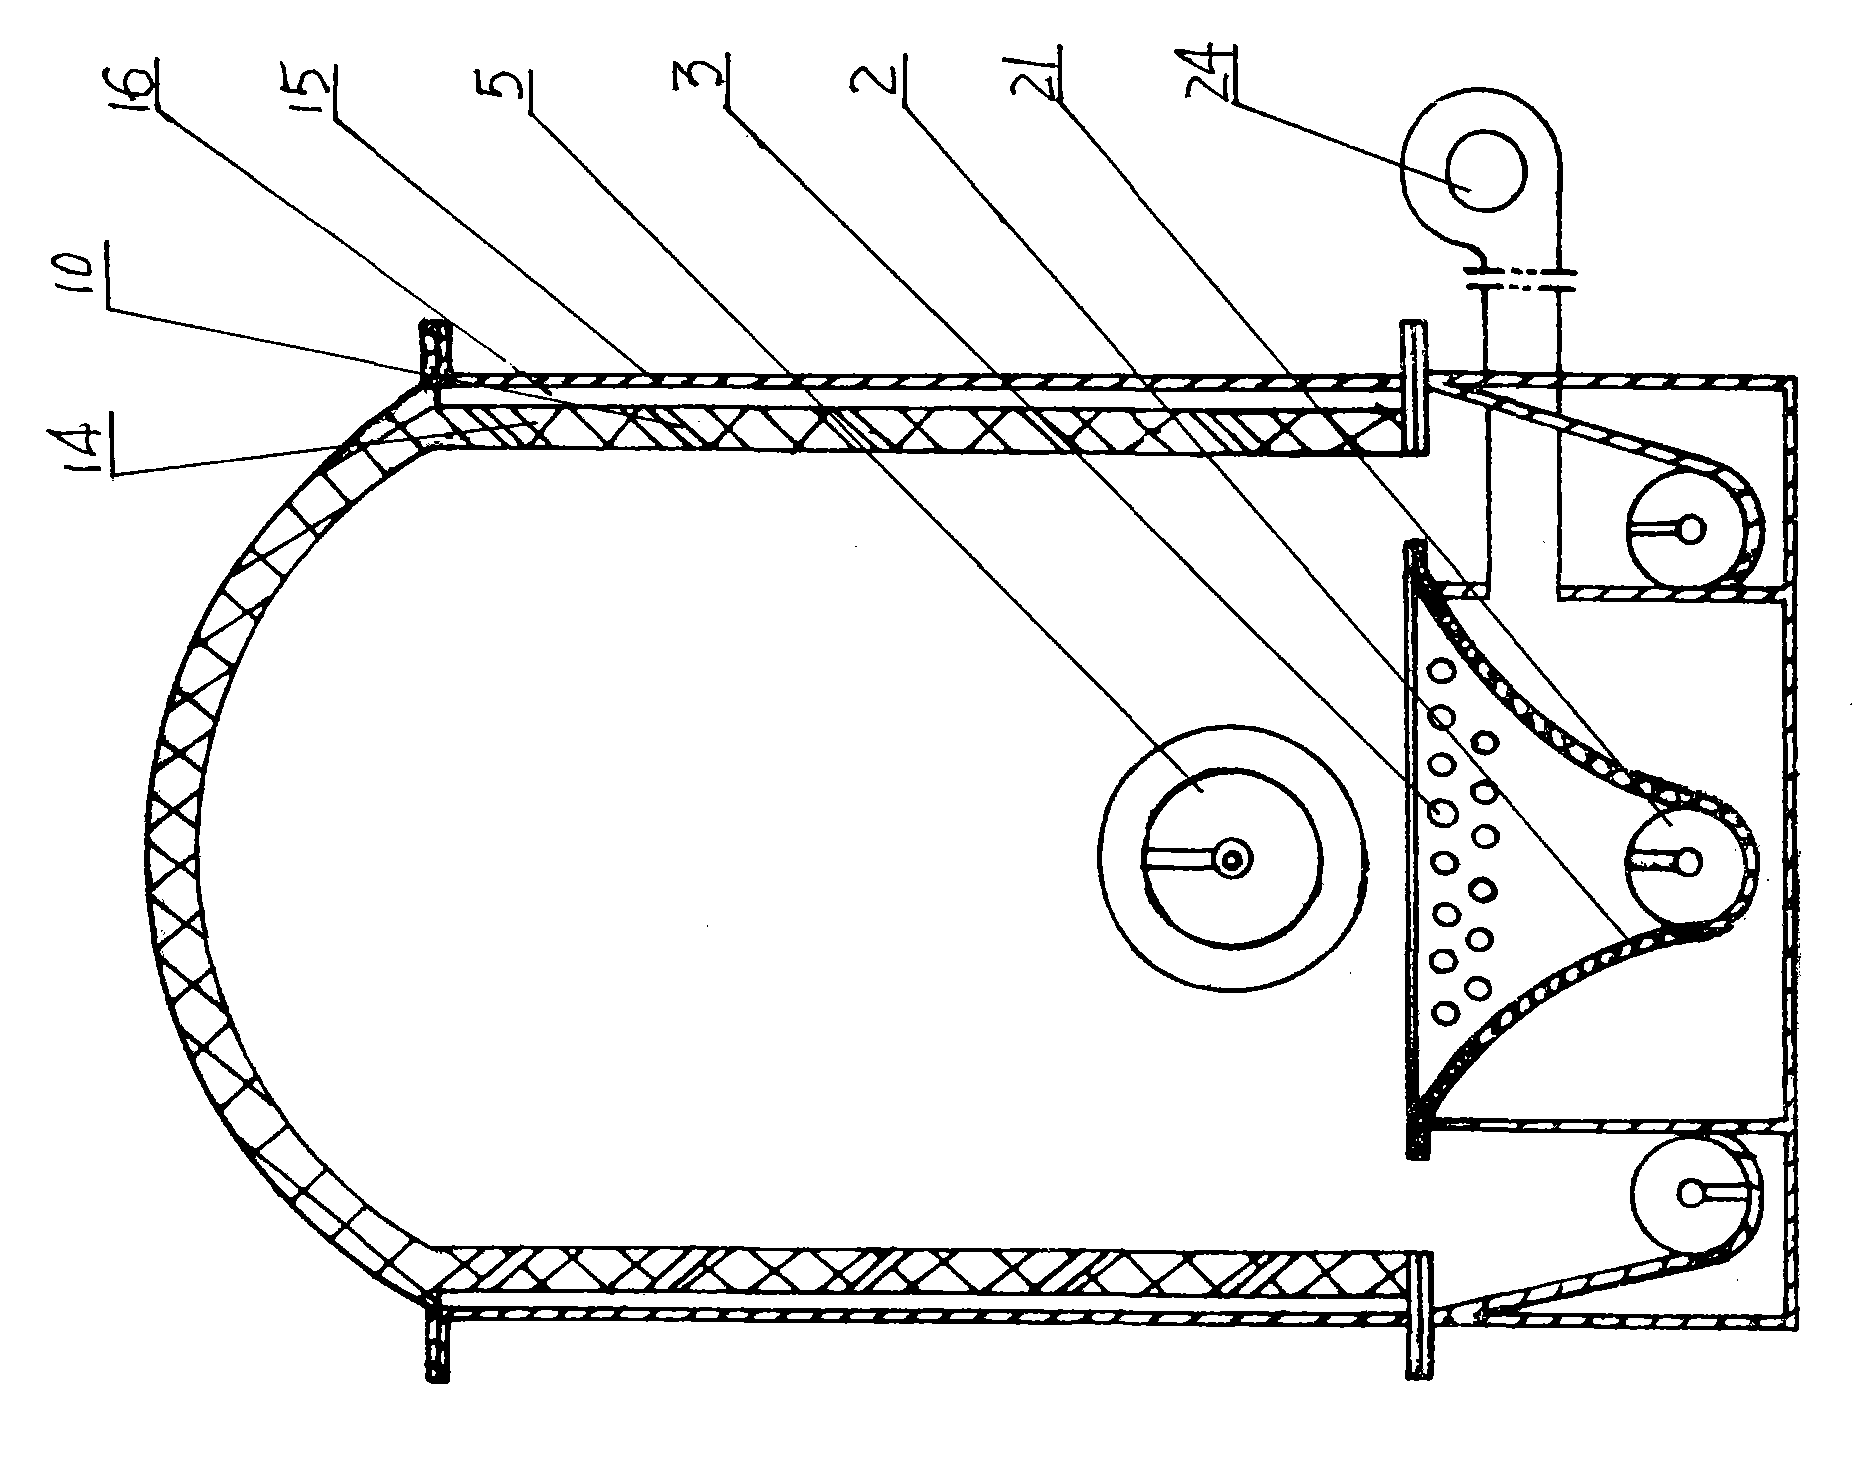 Straw gasification combustor